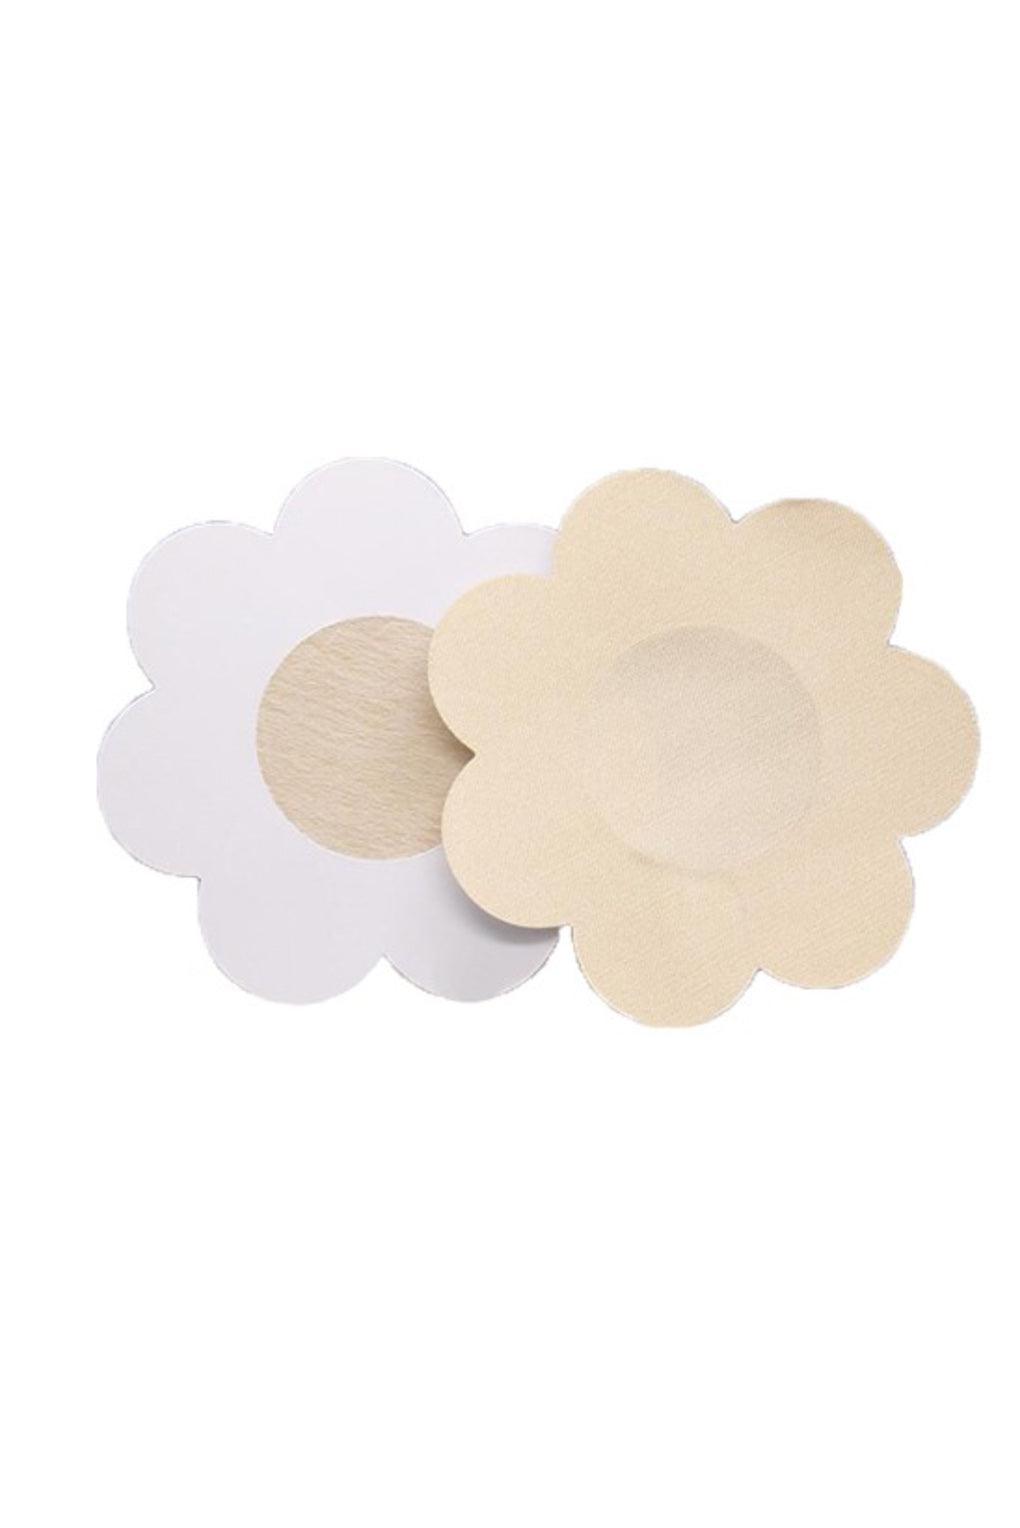 Load image into Gallery viewer, Nipple Cover Breast Petals | 3 Pair
